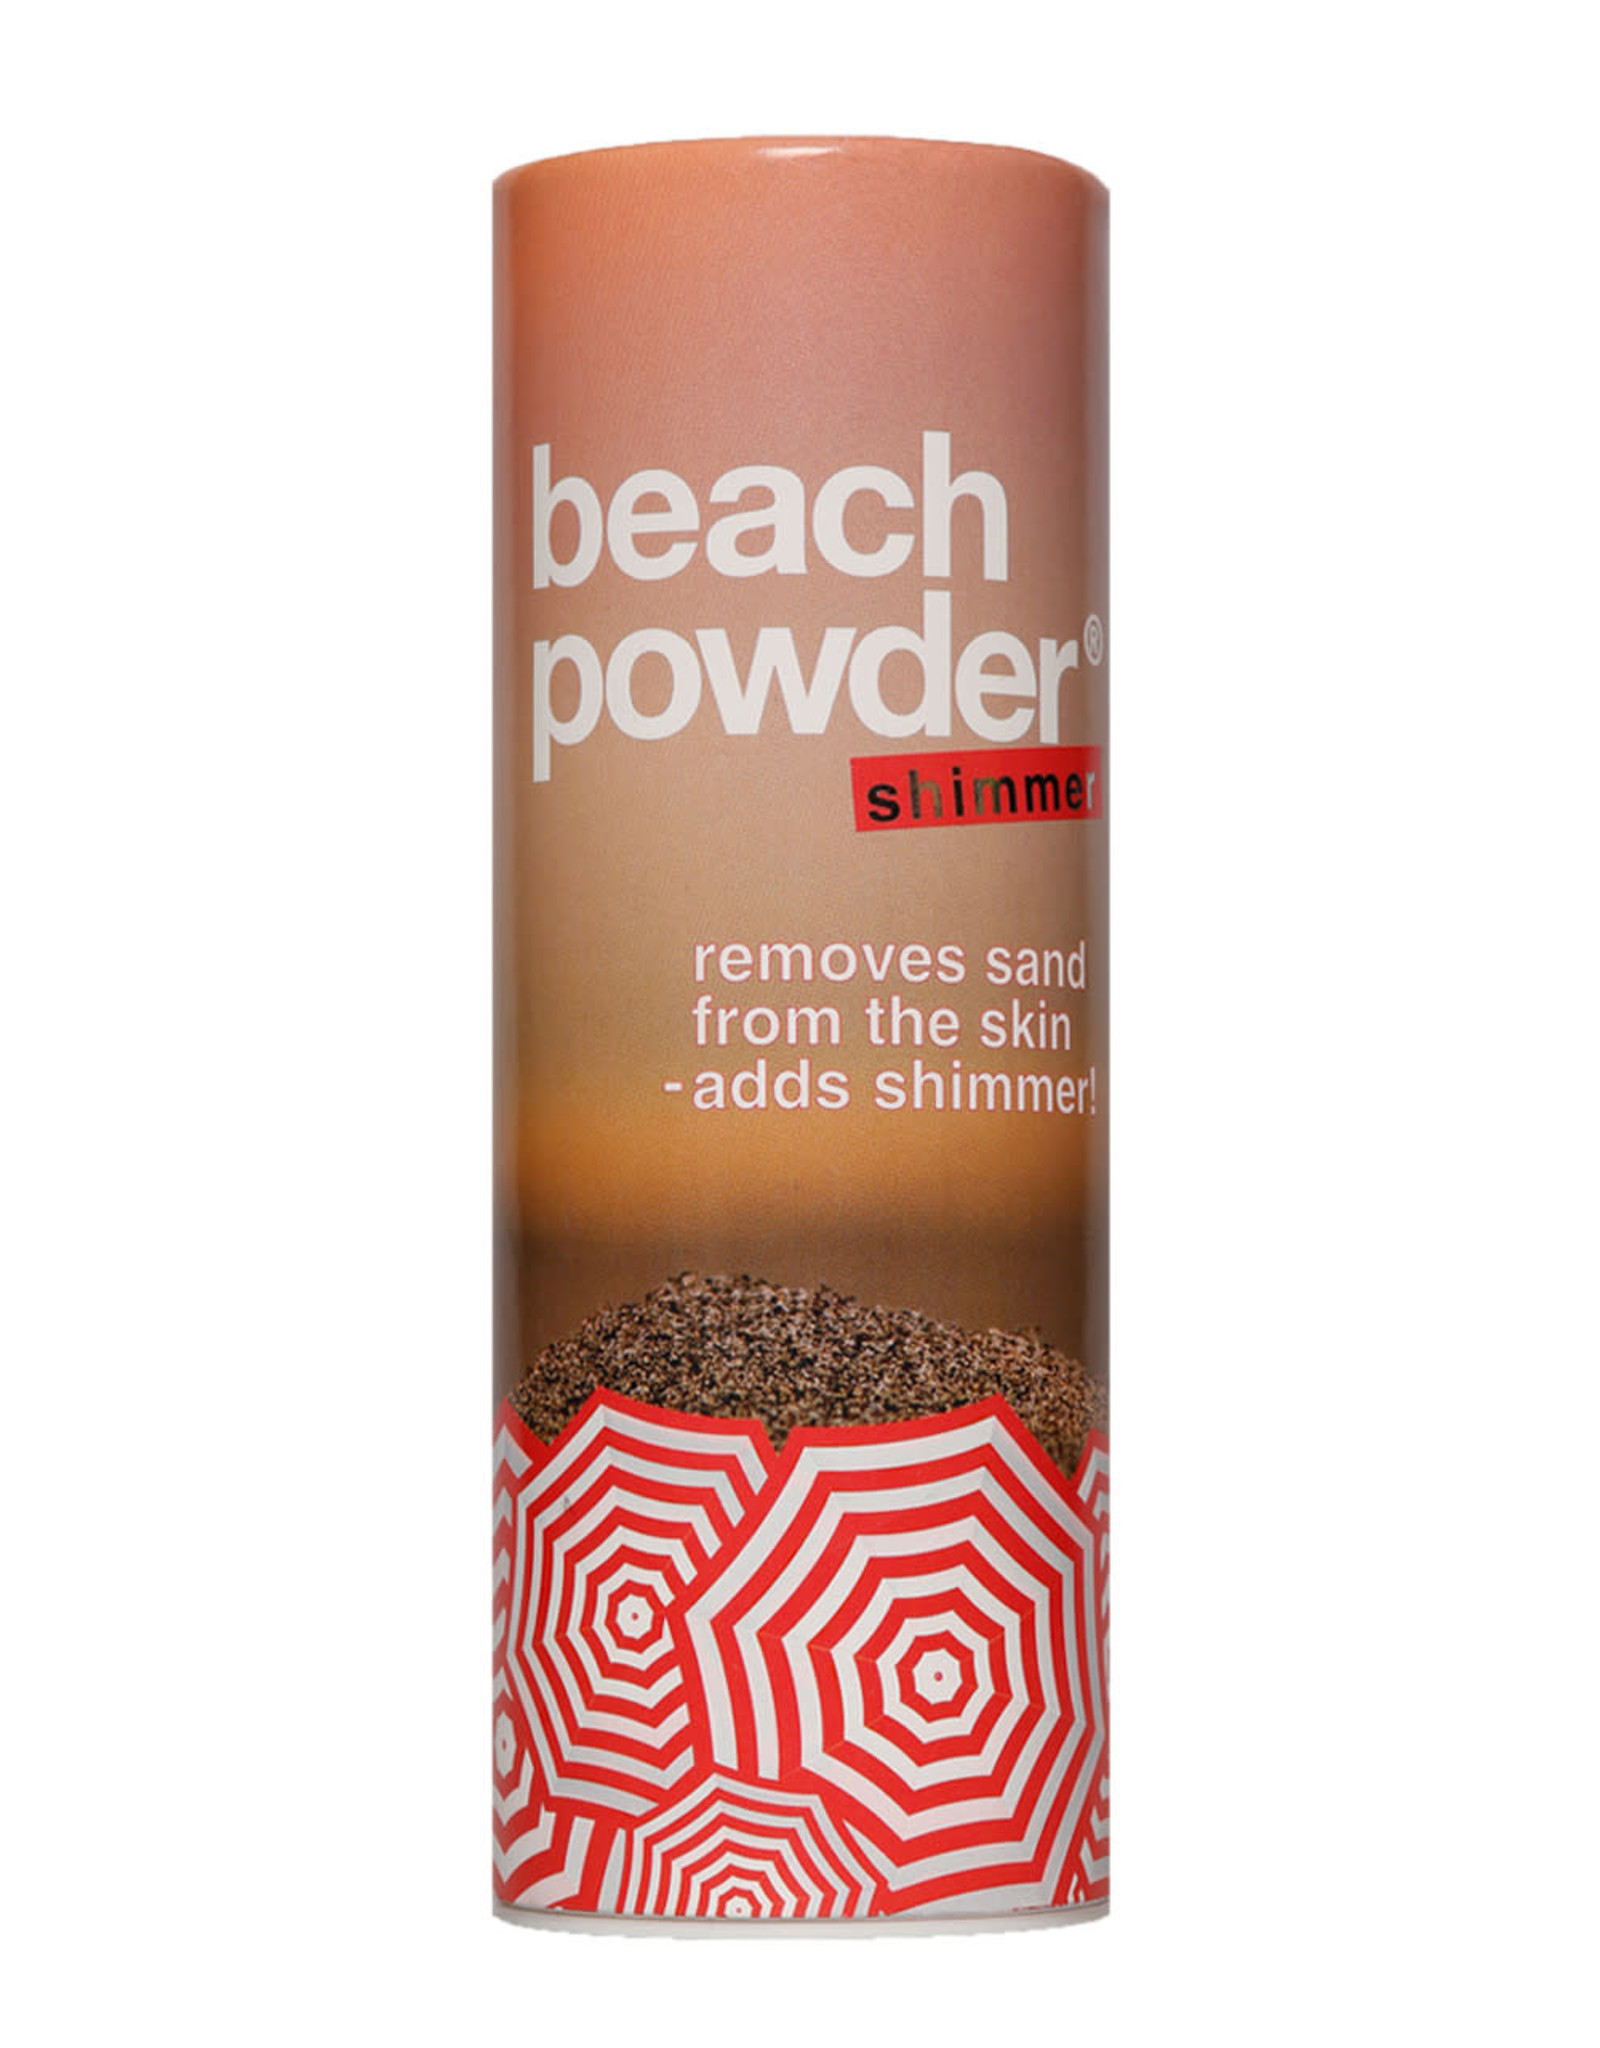 Beach Powder Beach Powder Shimmer - Removes Sand from the Skin with Shimmer